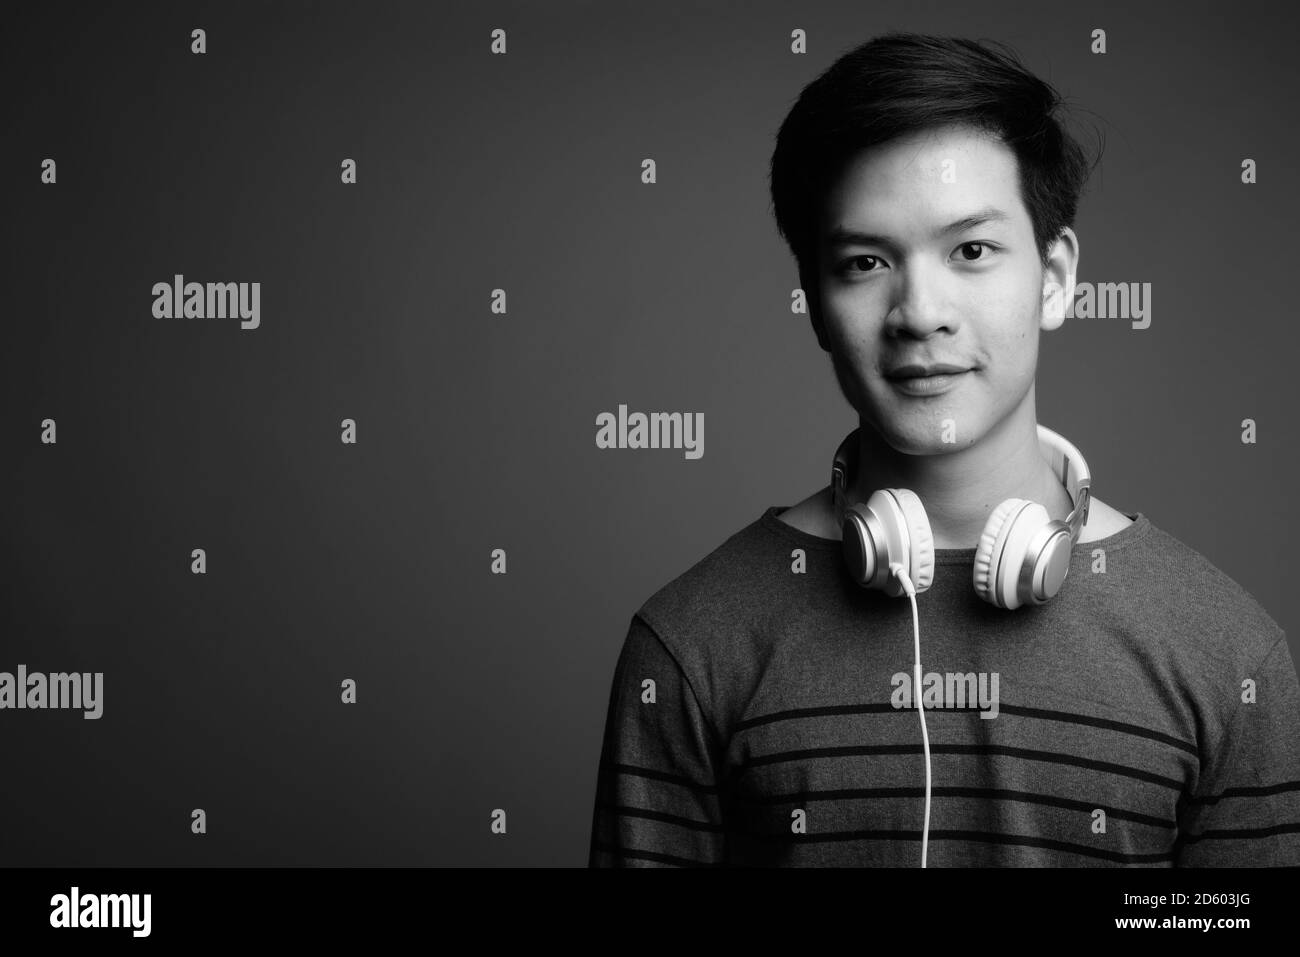 Young handsome Asian man wearing headphones against gray background Stock Photo